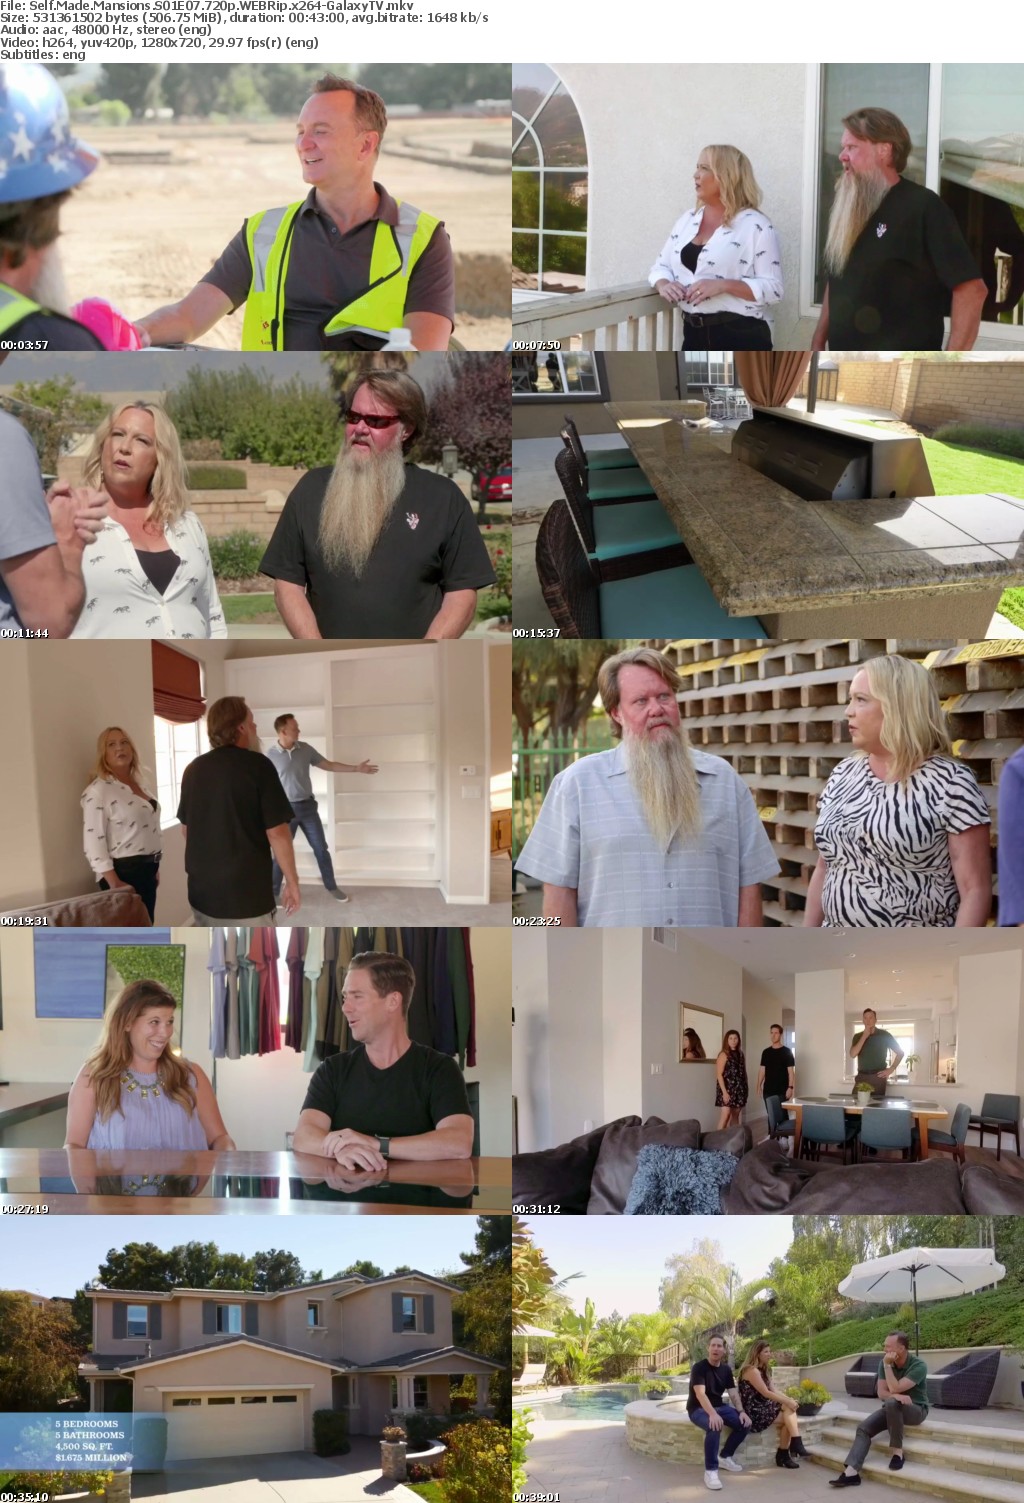 Self Made Mansions S01 COMPLETE 720p WEBRip x264-GalaxyTV